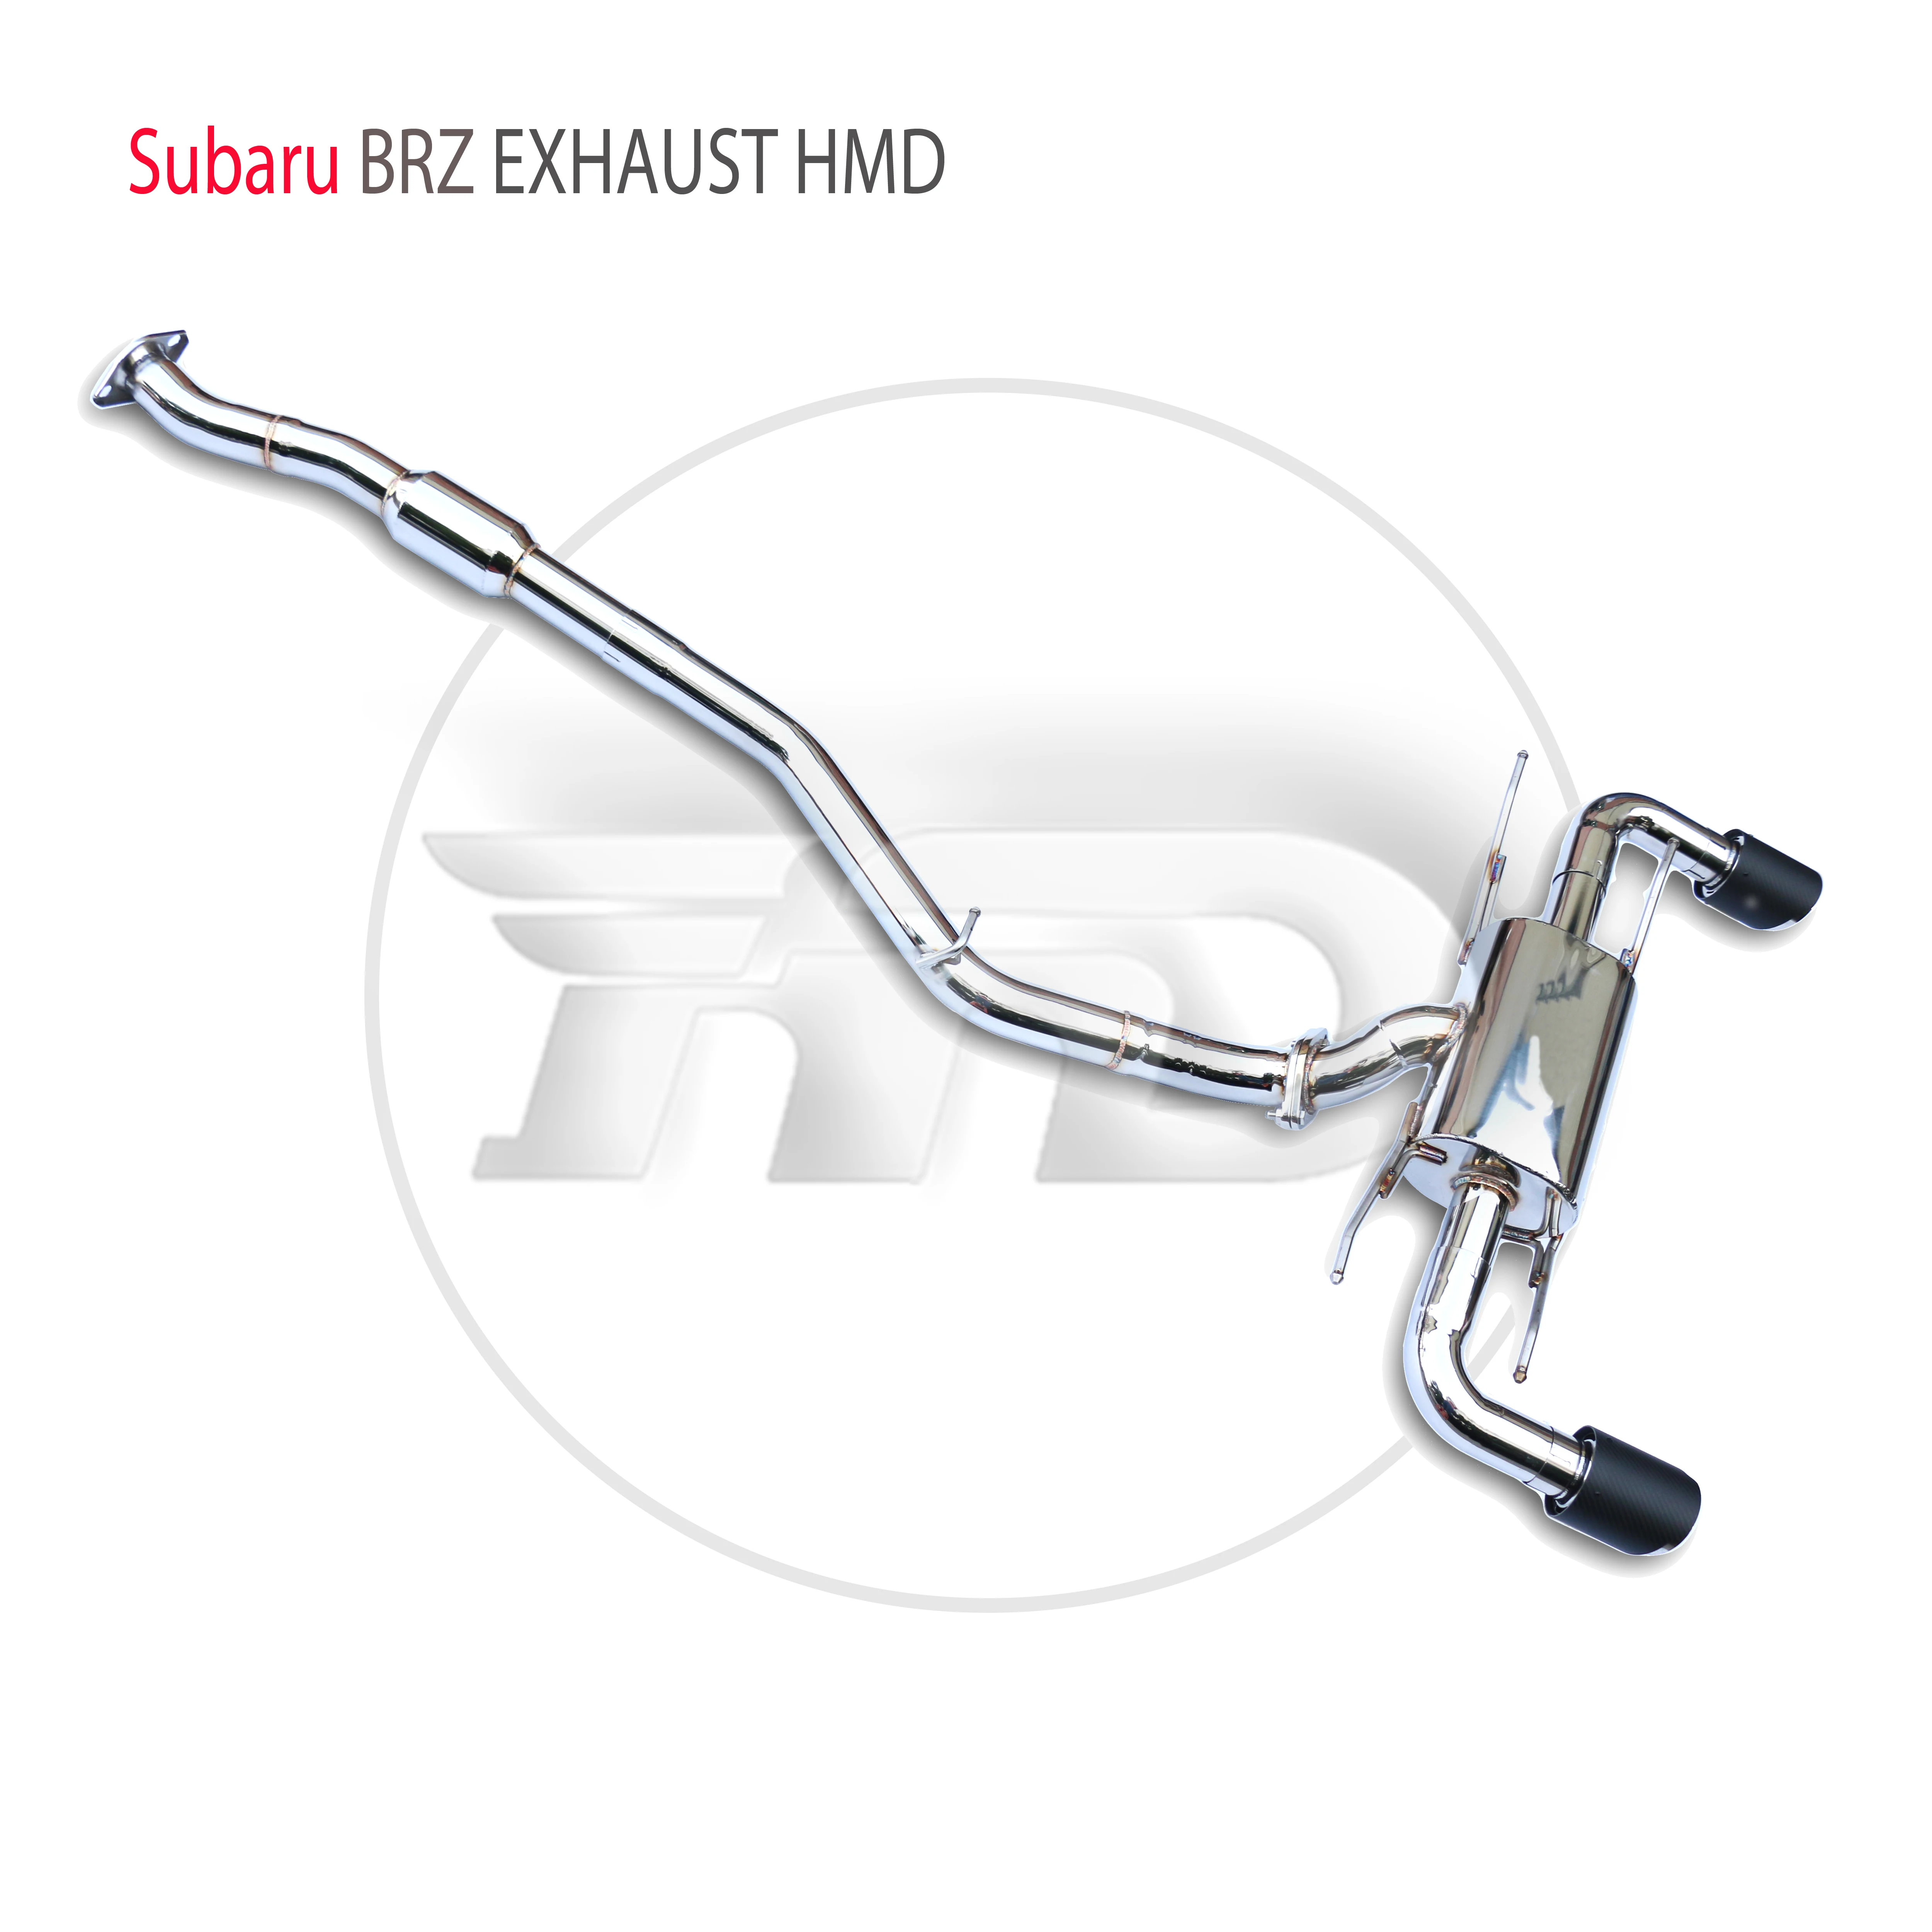 

HMD Stainless Steel Exhaust System Performance Catback for Subaru BRZ Auto Accesorios Electronic Valve Muffler